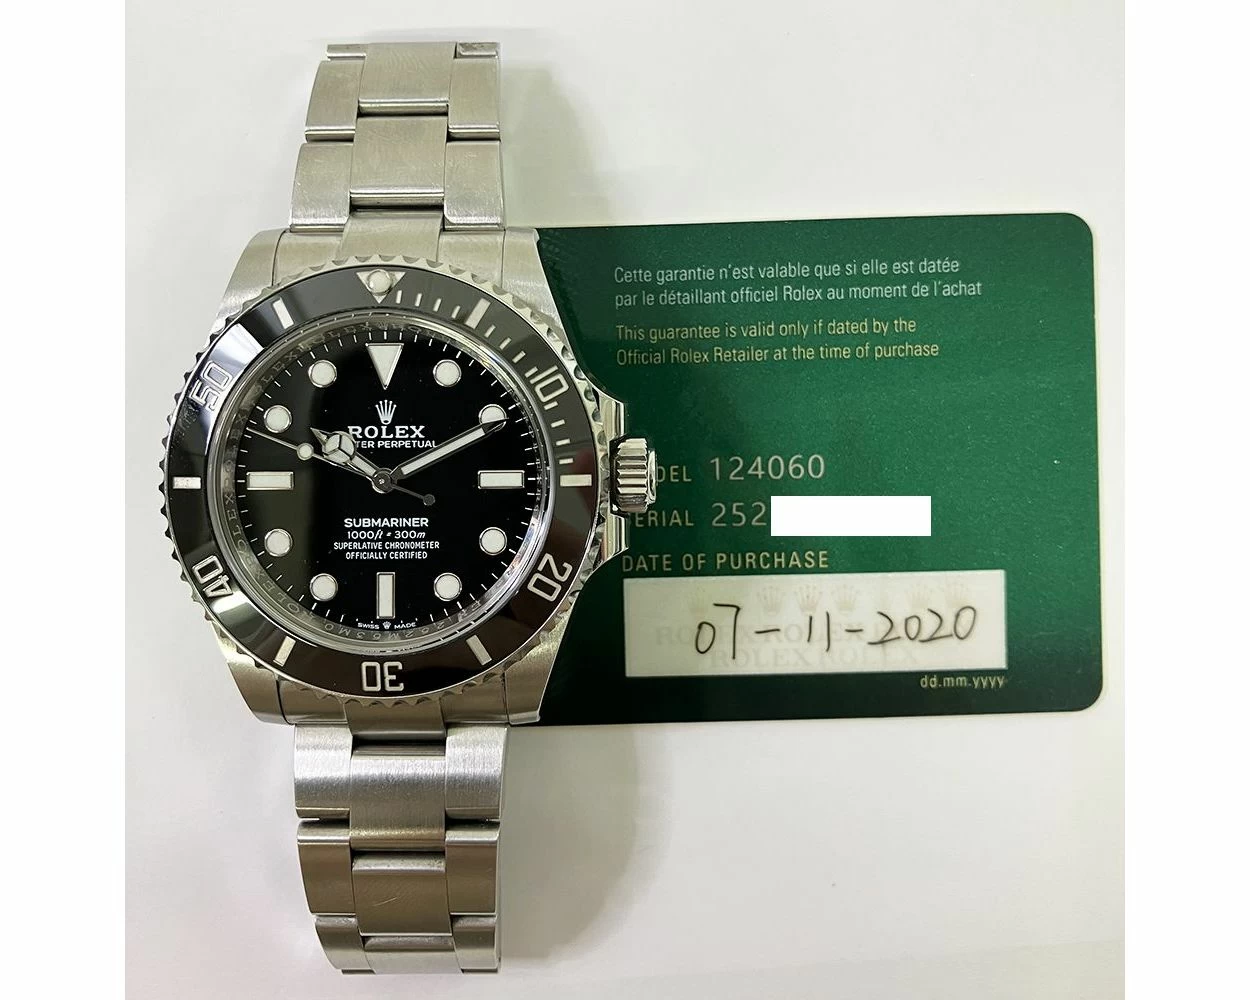 Buy Genuine Used Rolex Submariner Date 116610LV Watch - Green Dial